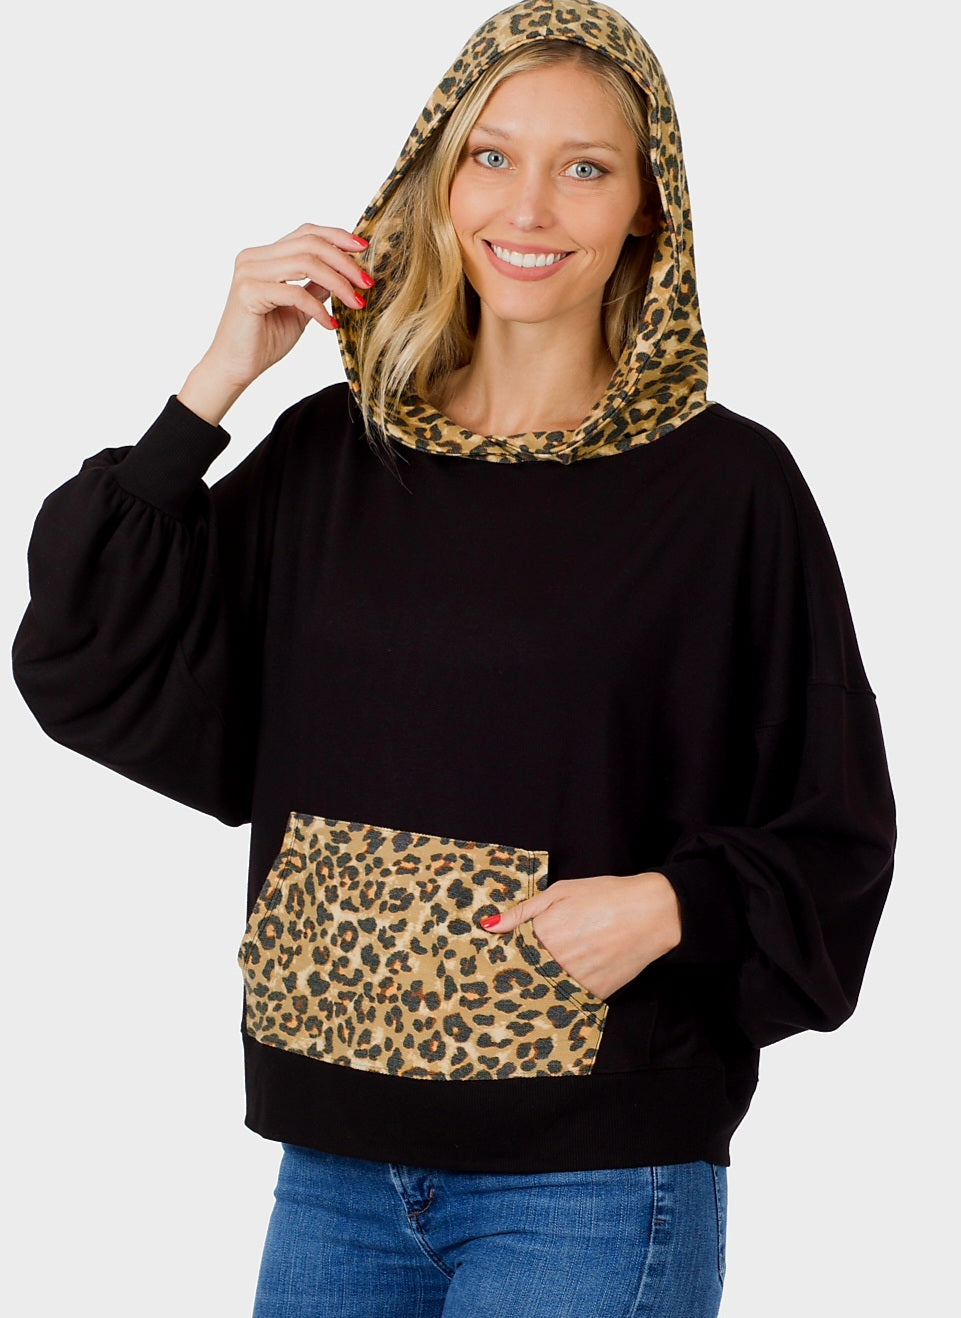 Zenana Black Knit Top With Leopard Hoodie And Pocket Size XS